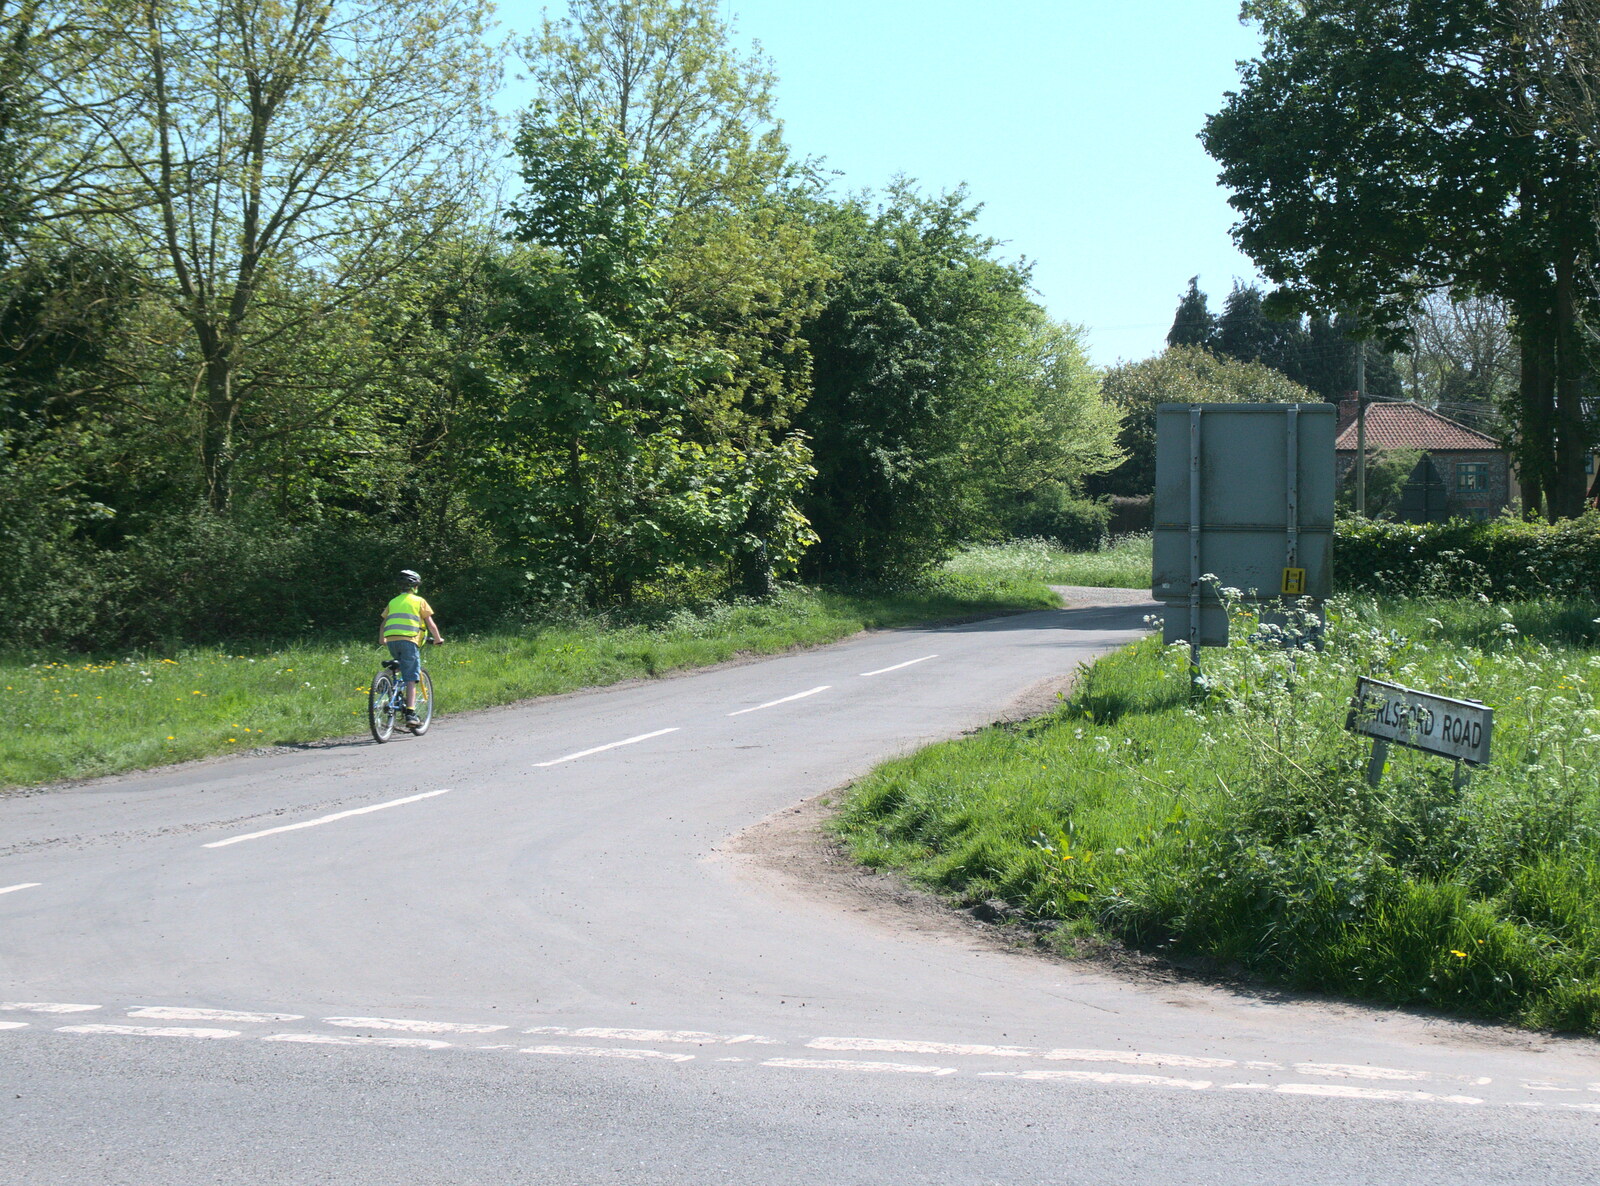 Fred cycles up Earlsford Road from A Bike Ride to the Railway Tavern, Mellis, Suffolk - 7th May 2018